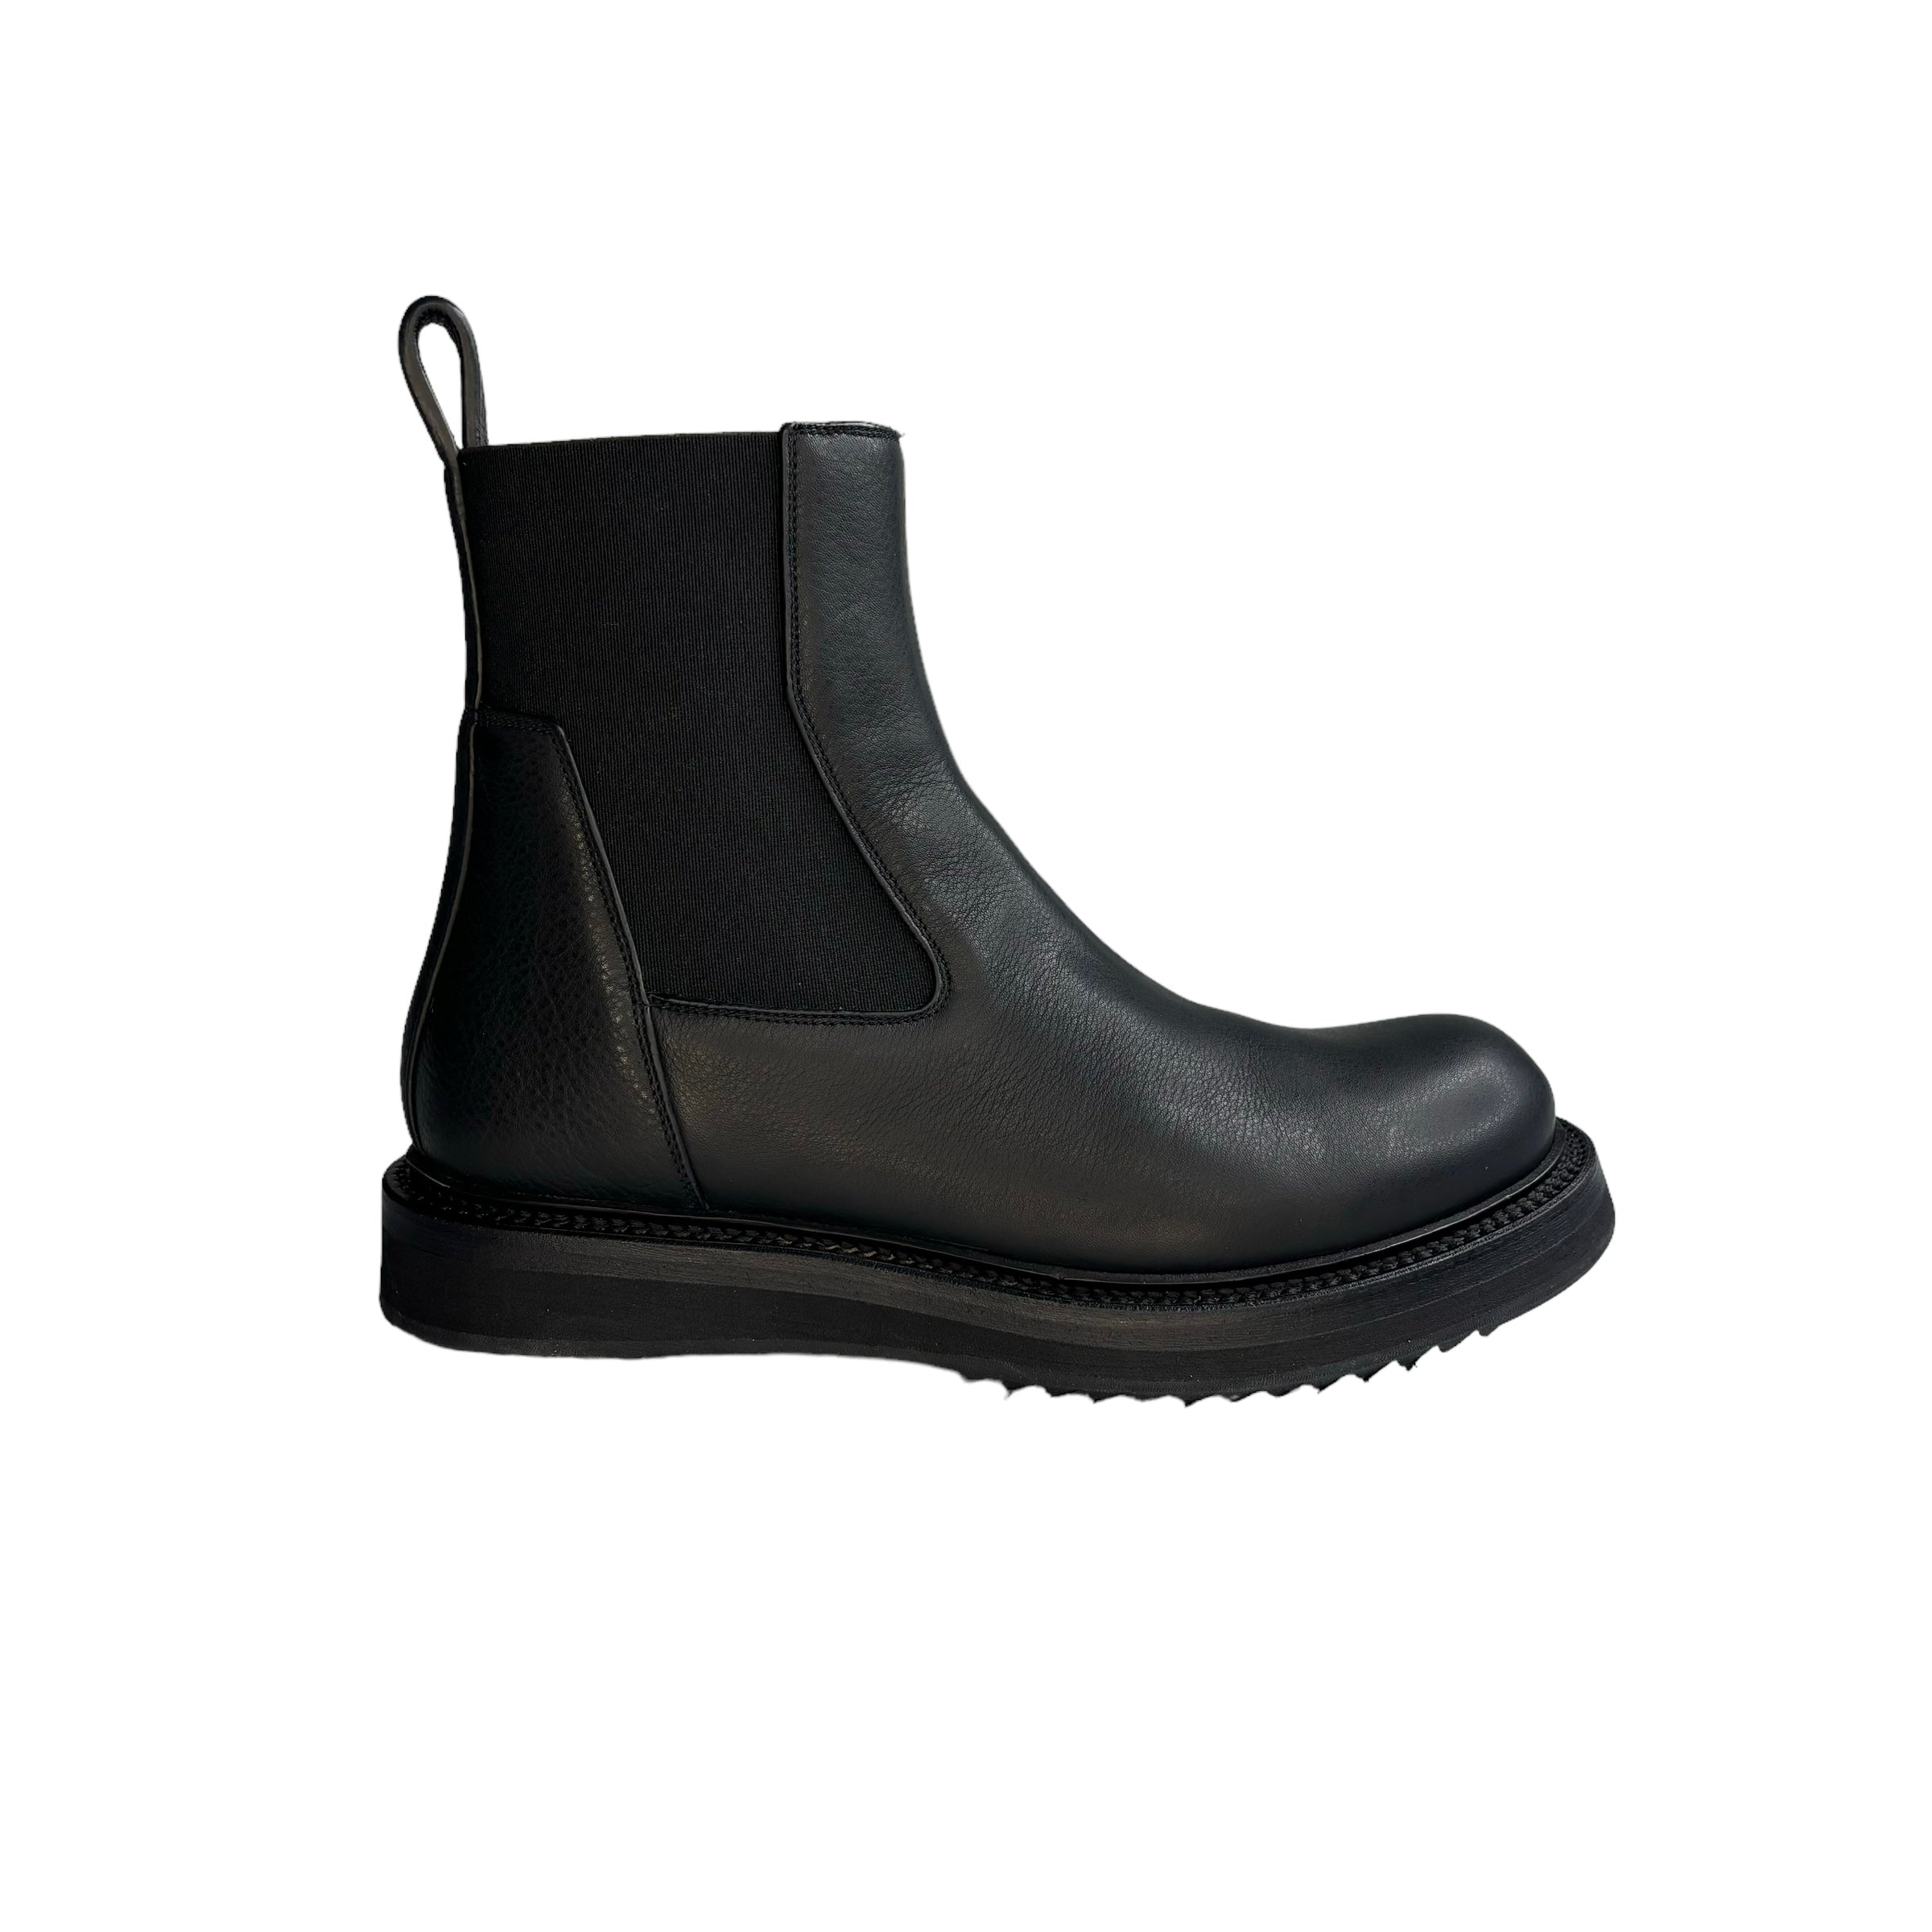 RICK OWENS Creeper Black Leather Boots